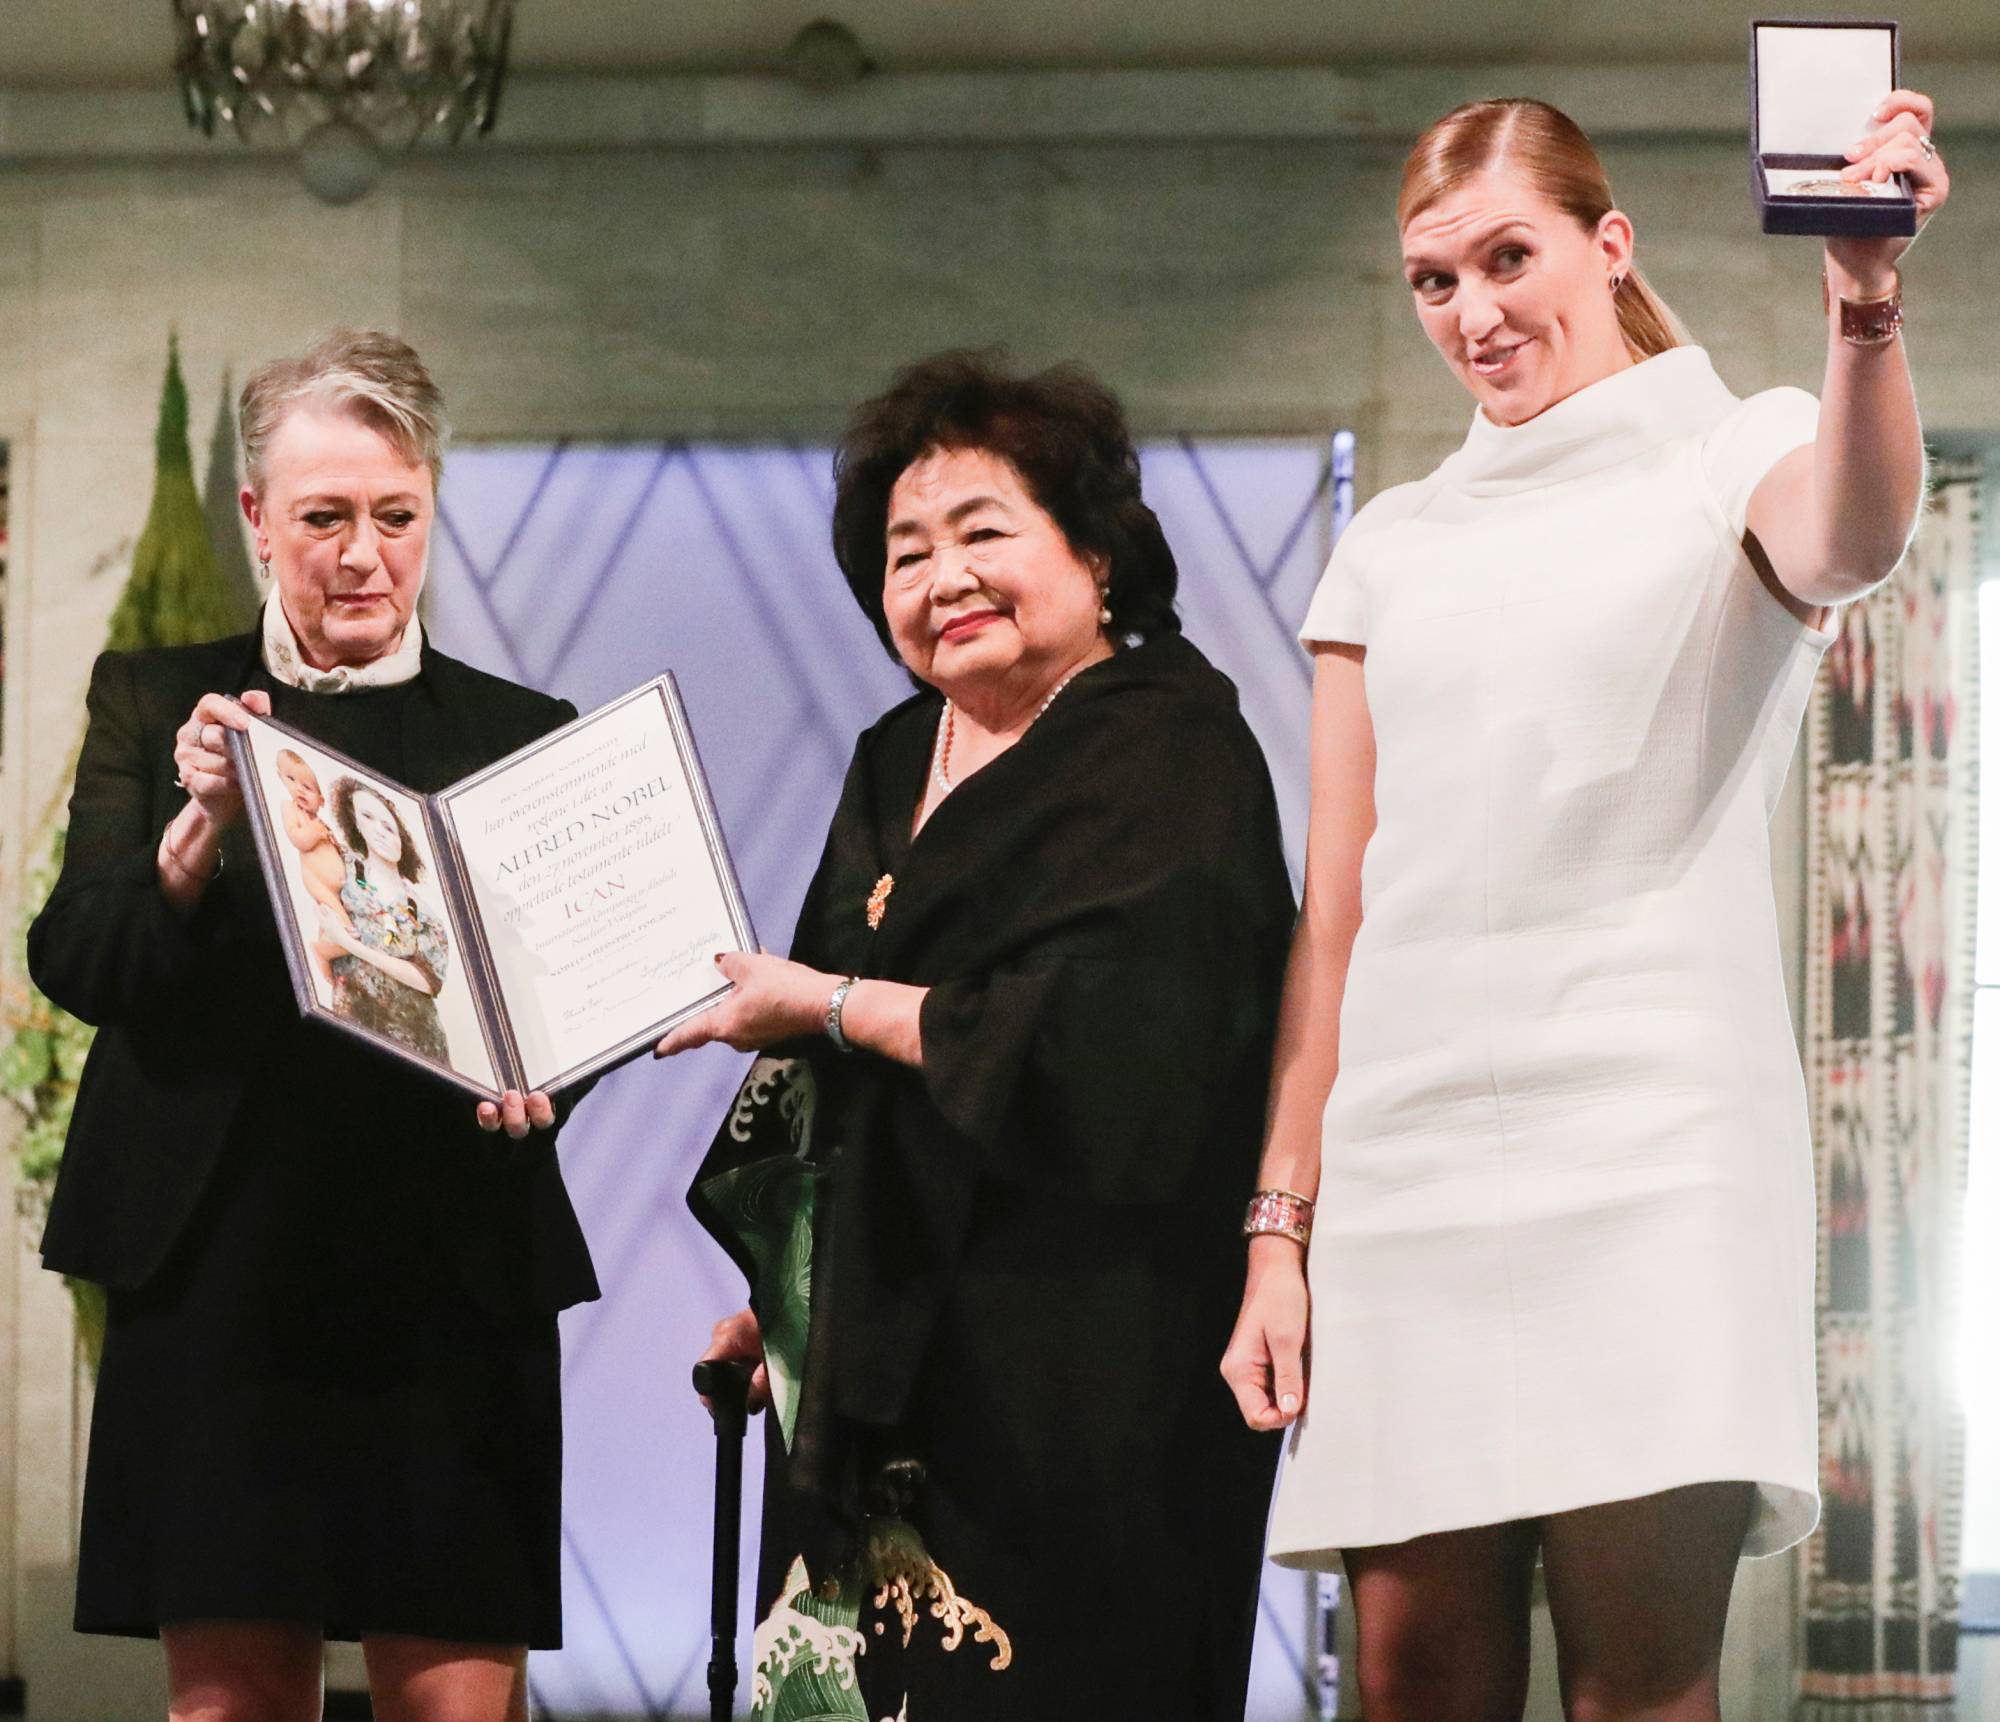 Hiroshima atomic bombing survivor Setsuko Thurlow (center) and ICAN Executive Director Beatrice Fihn (right) attend the awards ceremony for the Nobel Peace Prize in Oslo in December 2017. Thurlow and Finh led a successful campaign pushing for the ratification of the Treaty on the Prohibition of Nuclear Weapons. | NTB SCANPIX / TBERIT ROALD / VIA REUTERS    